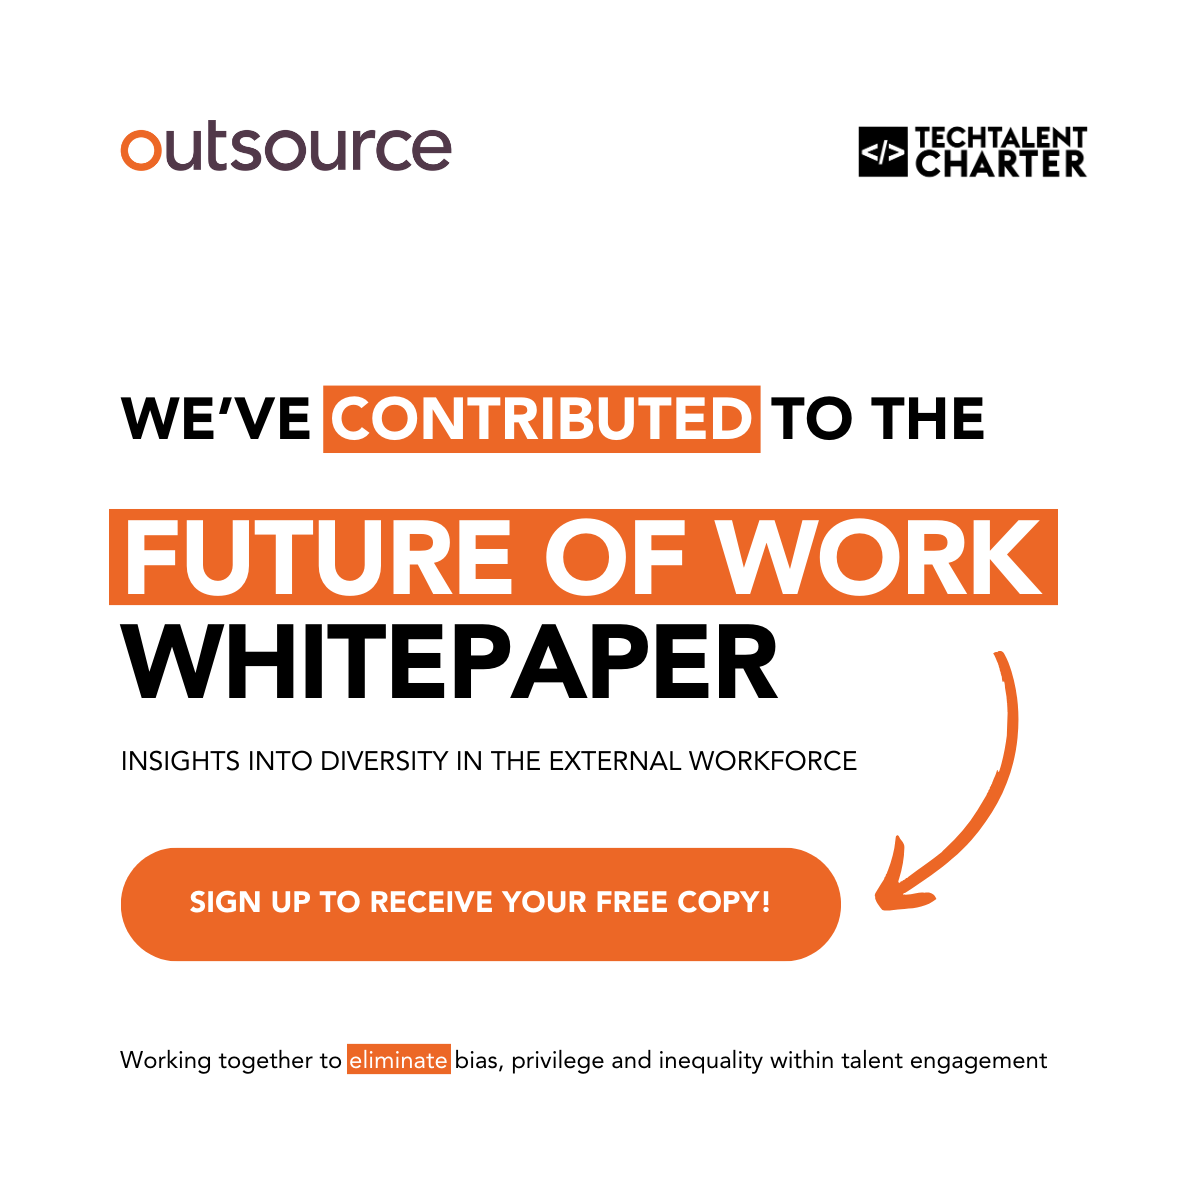 We contributed to @Outsourceuk's 'The Future of Work—#DiversityAndInclusion in the External Workforce' whitepaper - a roadmap for organisations to build a diverse talent pool within their contingent #workforce. 

Follow the link to access it now: hubs.la/Q02t7RlT0